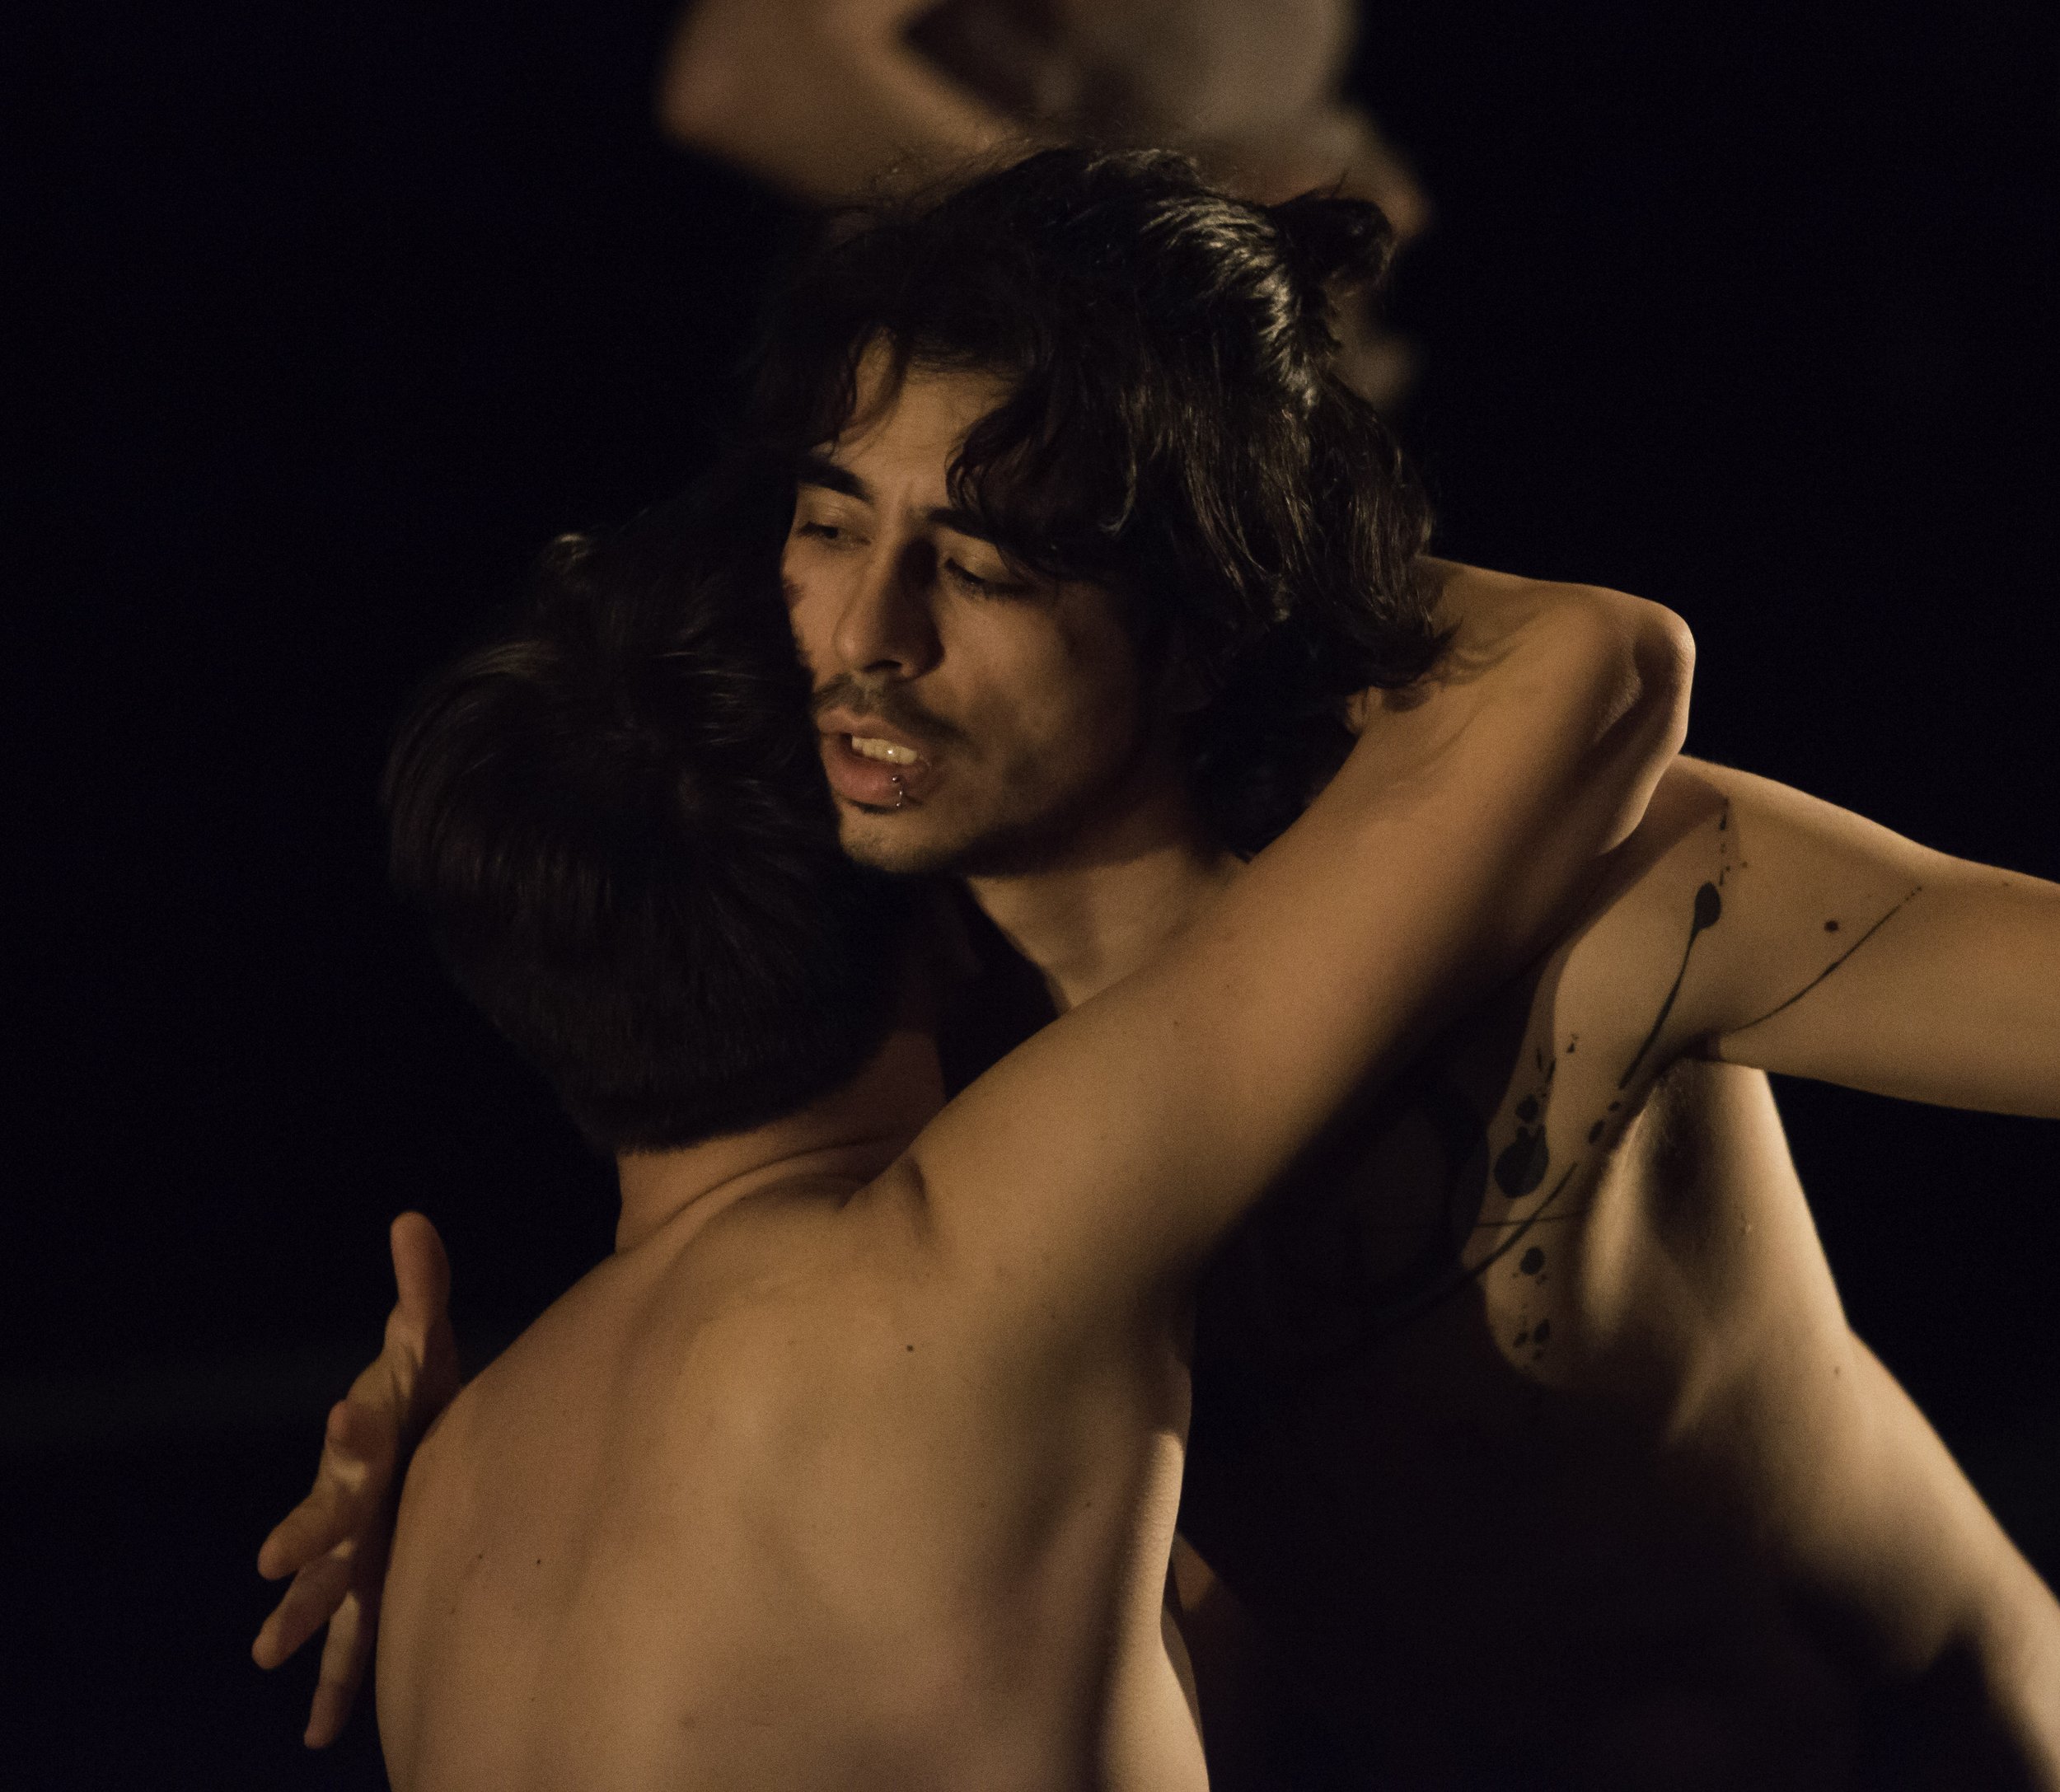 Two shirtless dancers embrace.